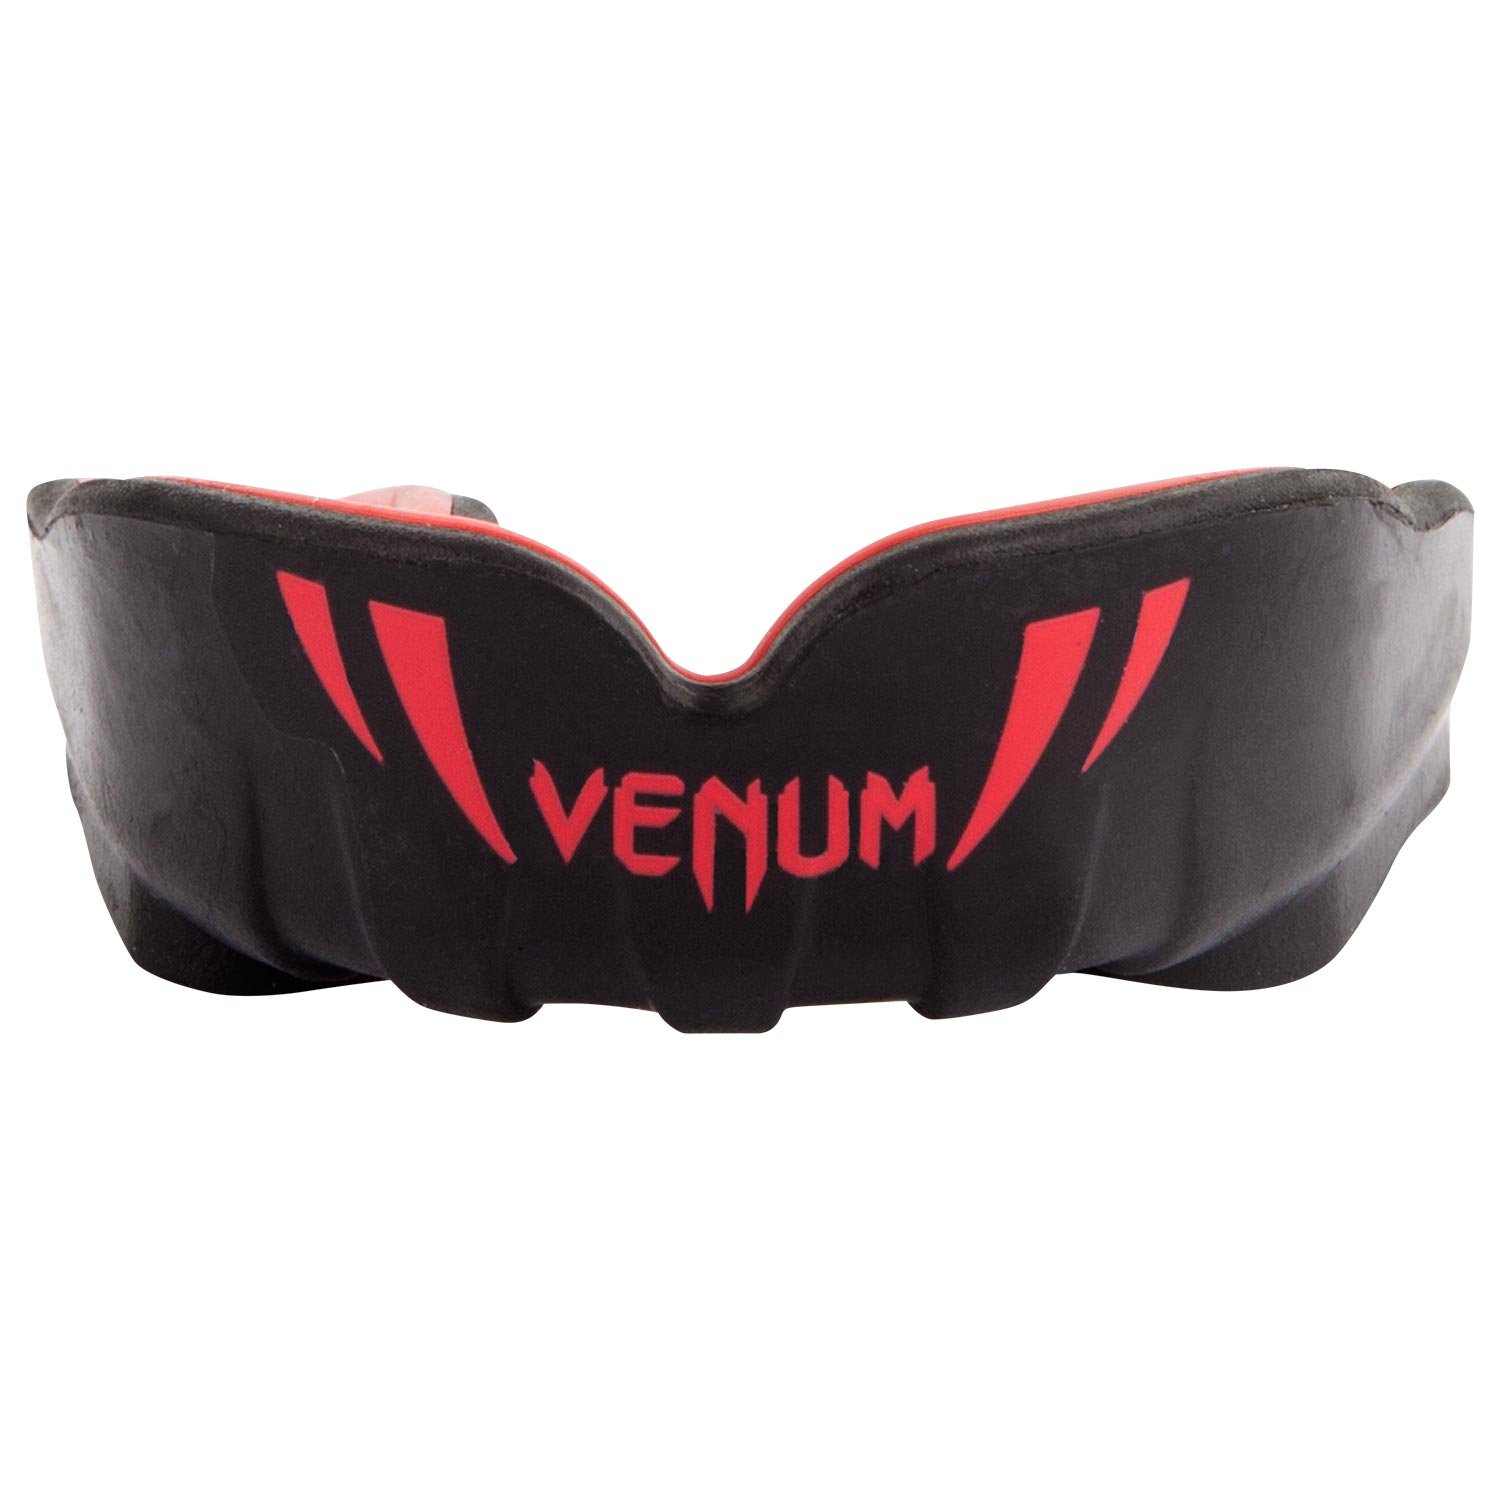 Venum Challenger Kid's Gel and Rubber Protective Mouthguard with Case